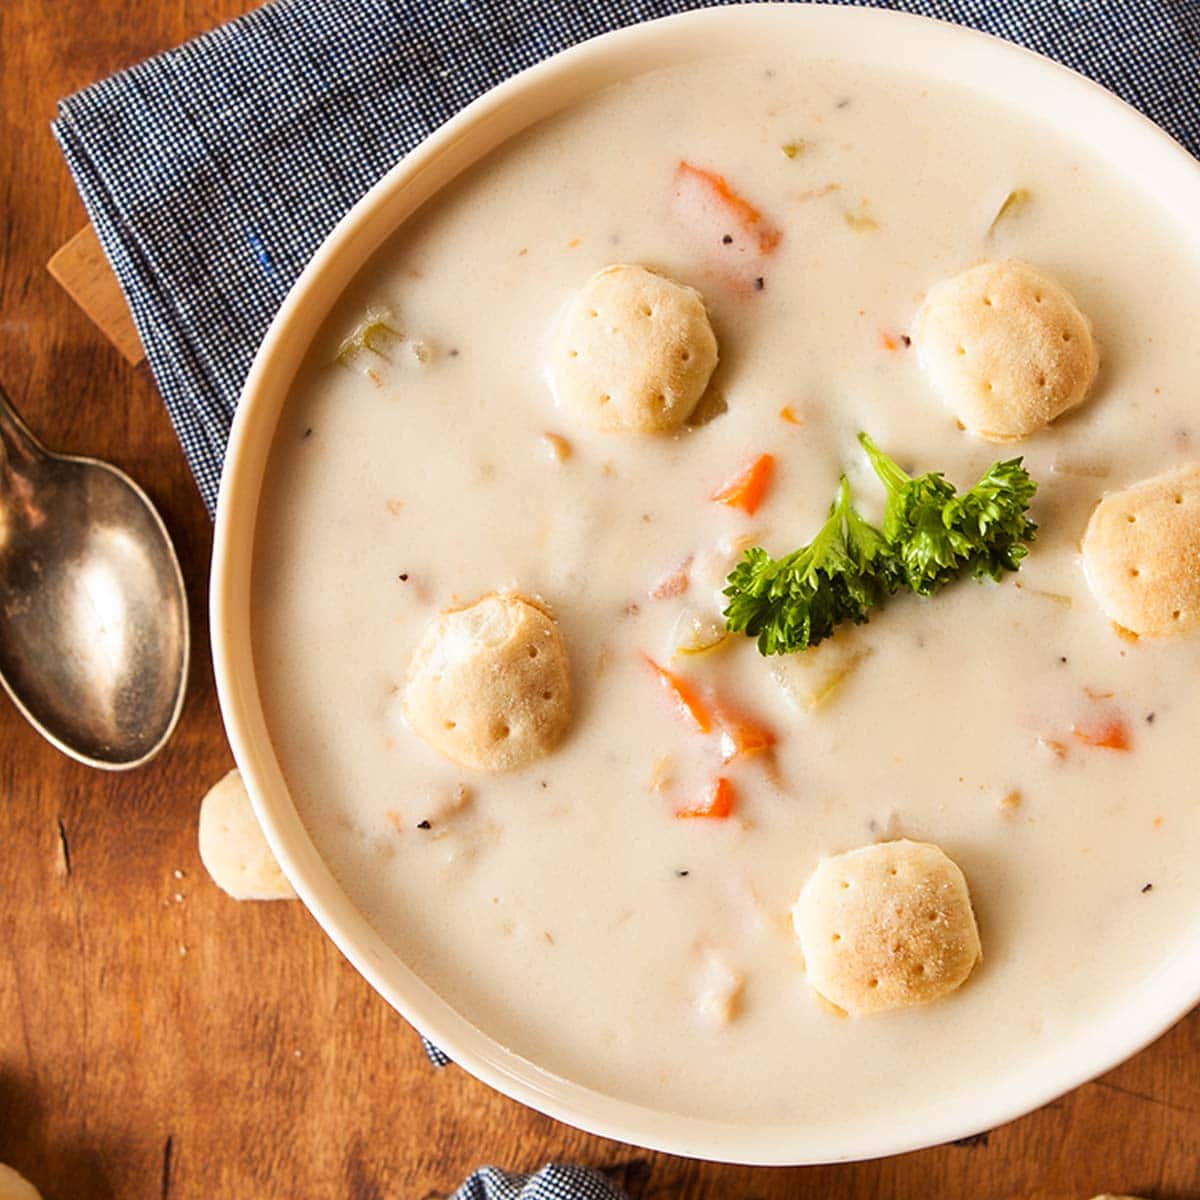 One of the great things about clam chowder is that it's a favorite with most people. Here are 15 side dishes to make it even more nourishing.